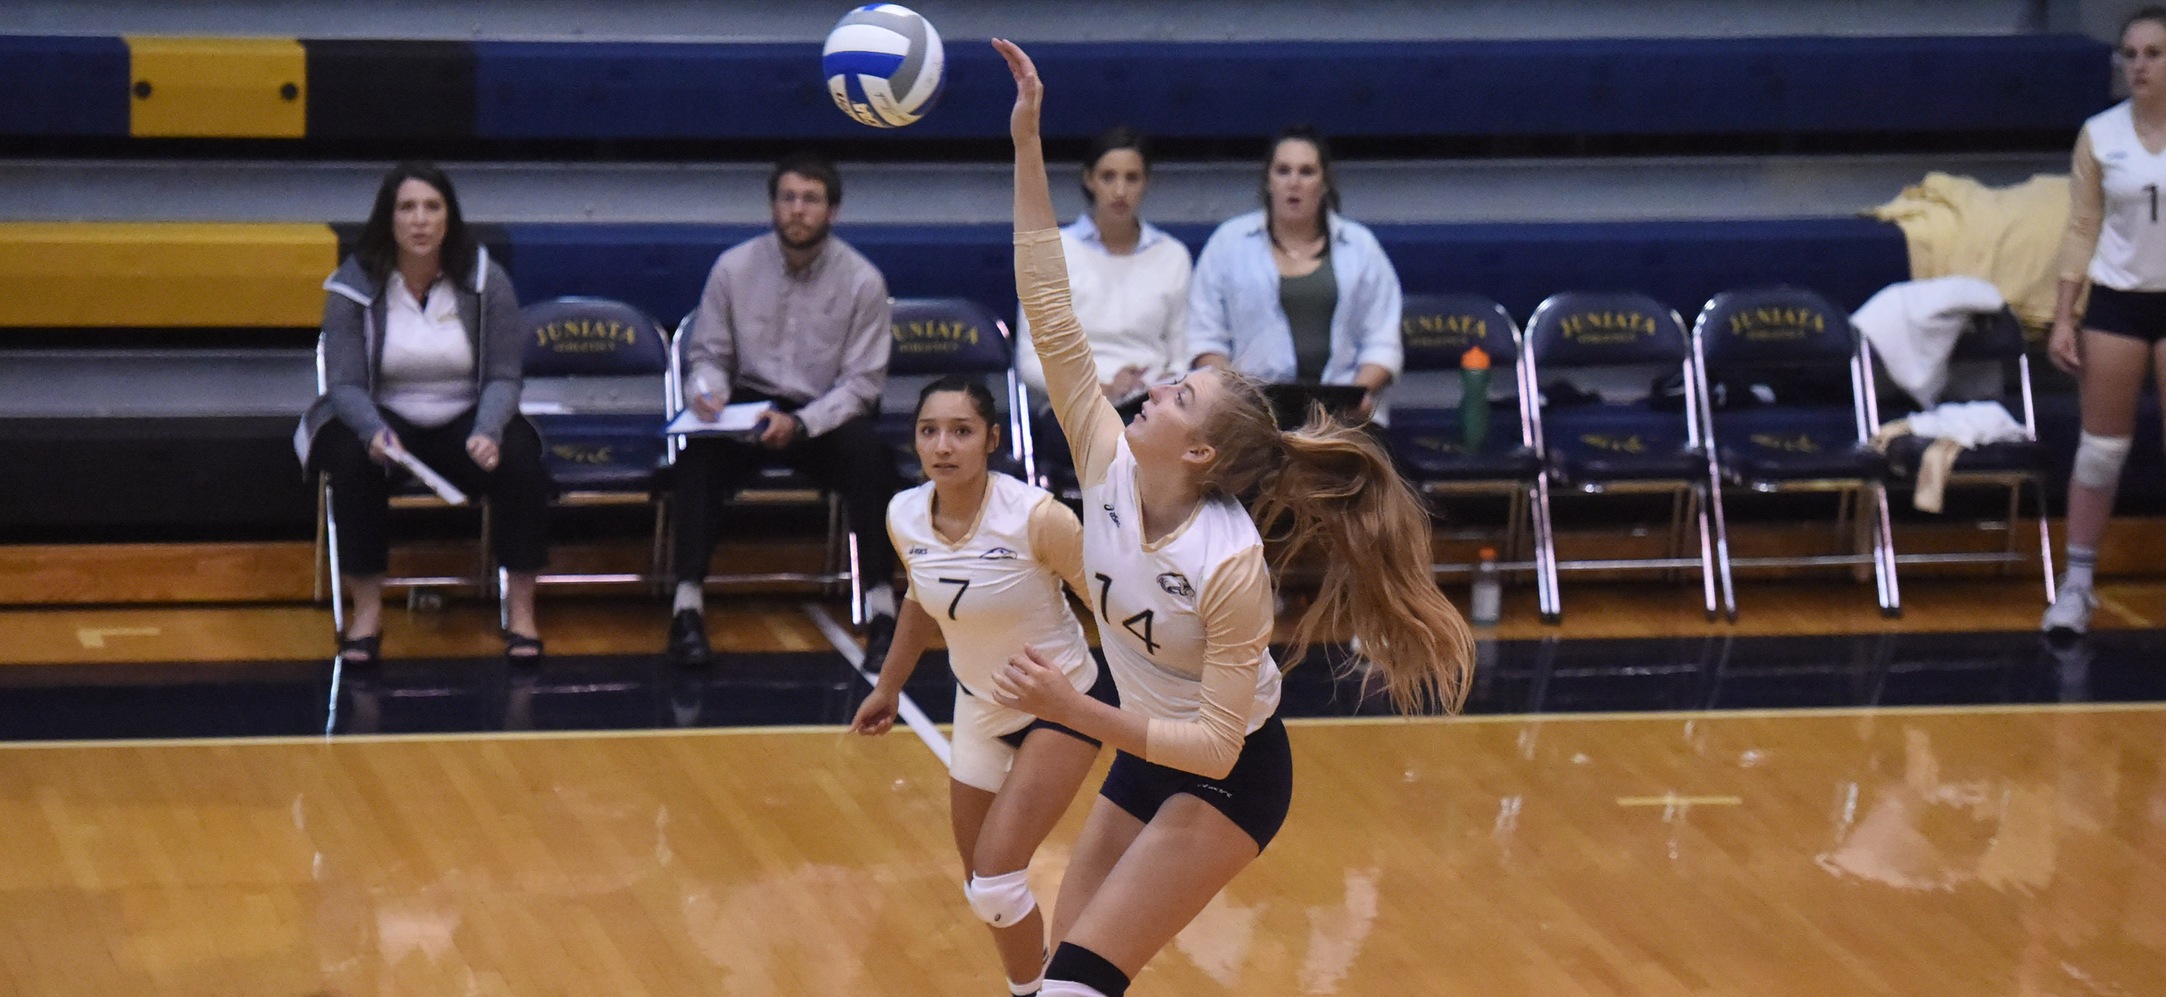 Women's Volleyball Suffers First Defeat of the Year to #8 Claremont-Mudd-Scripps